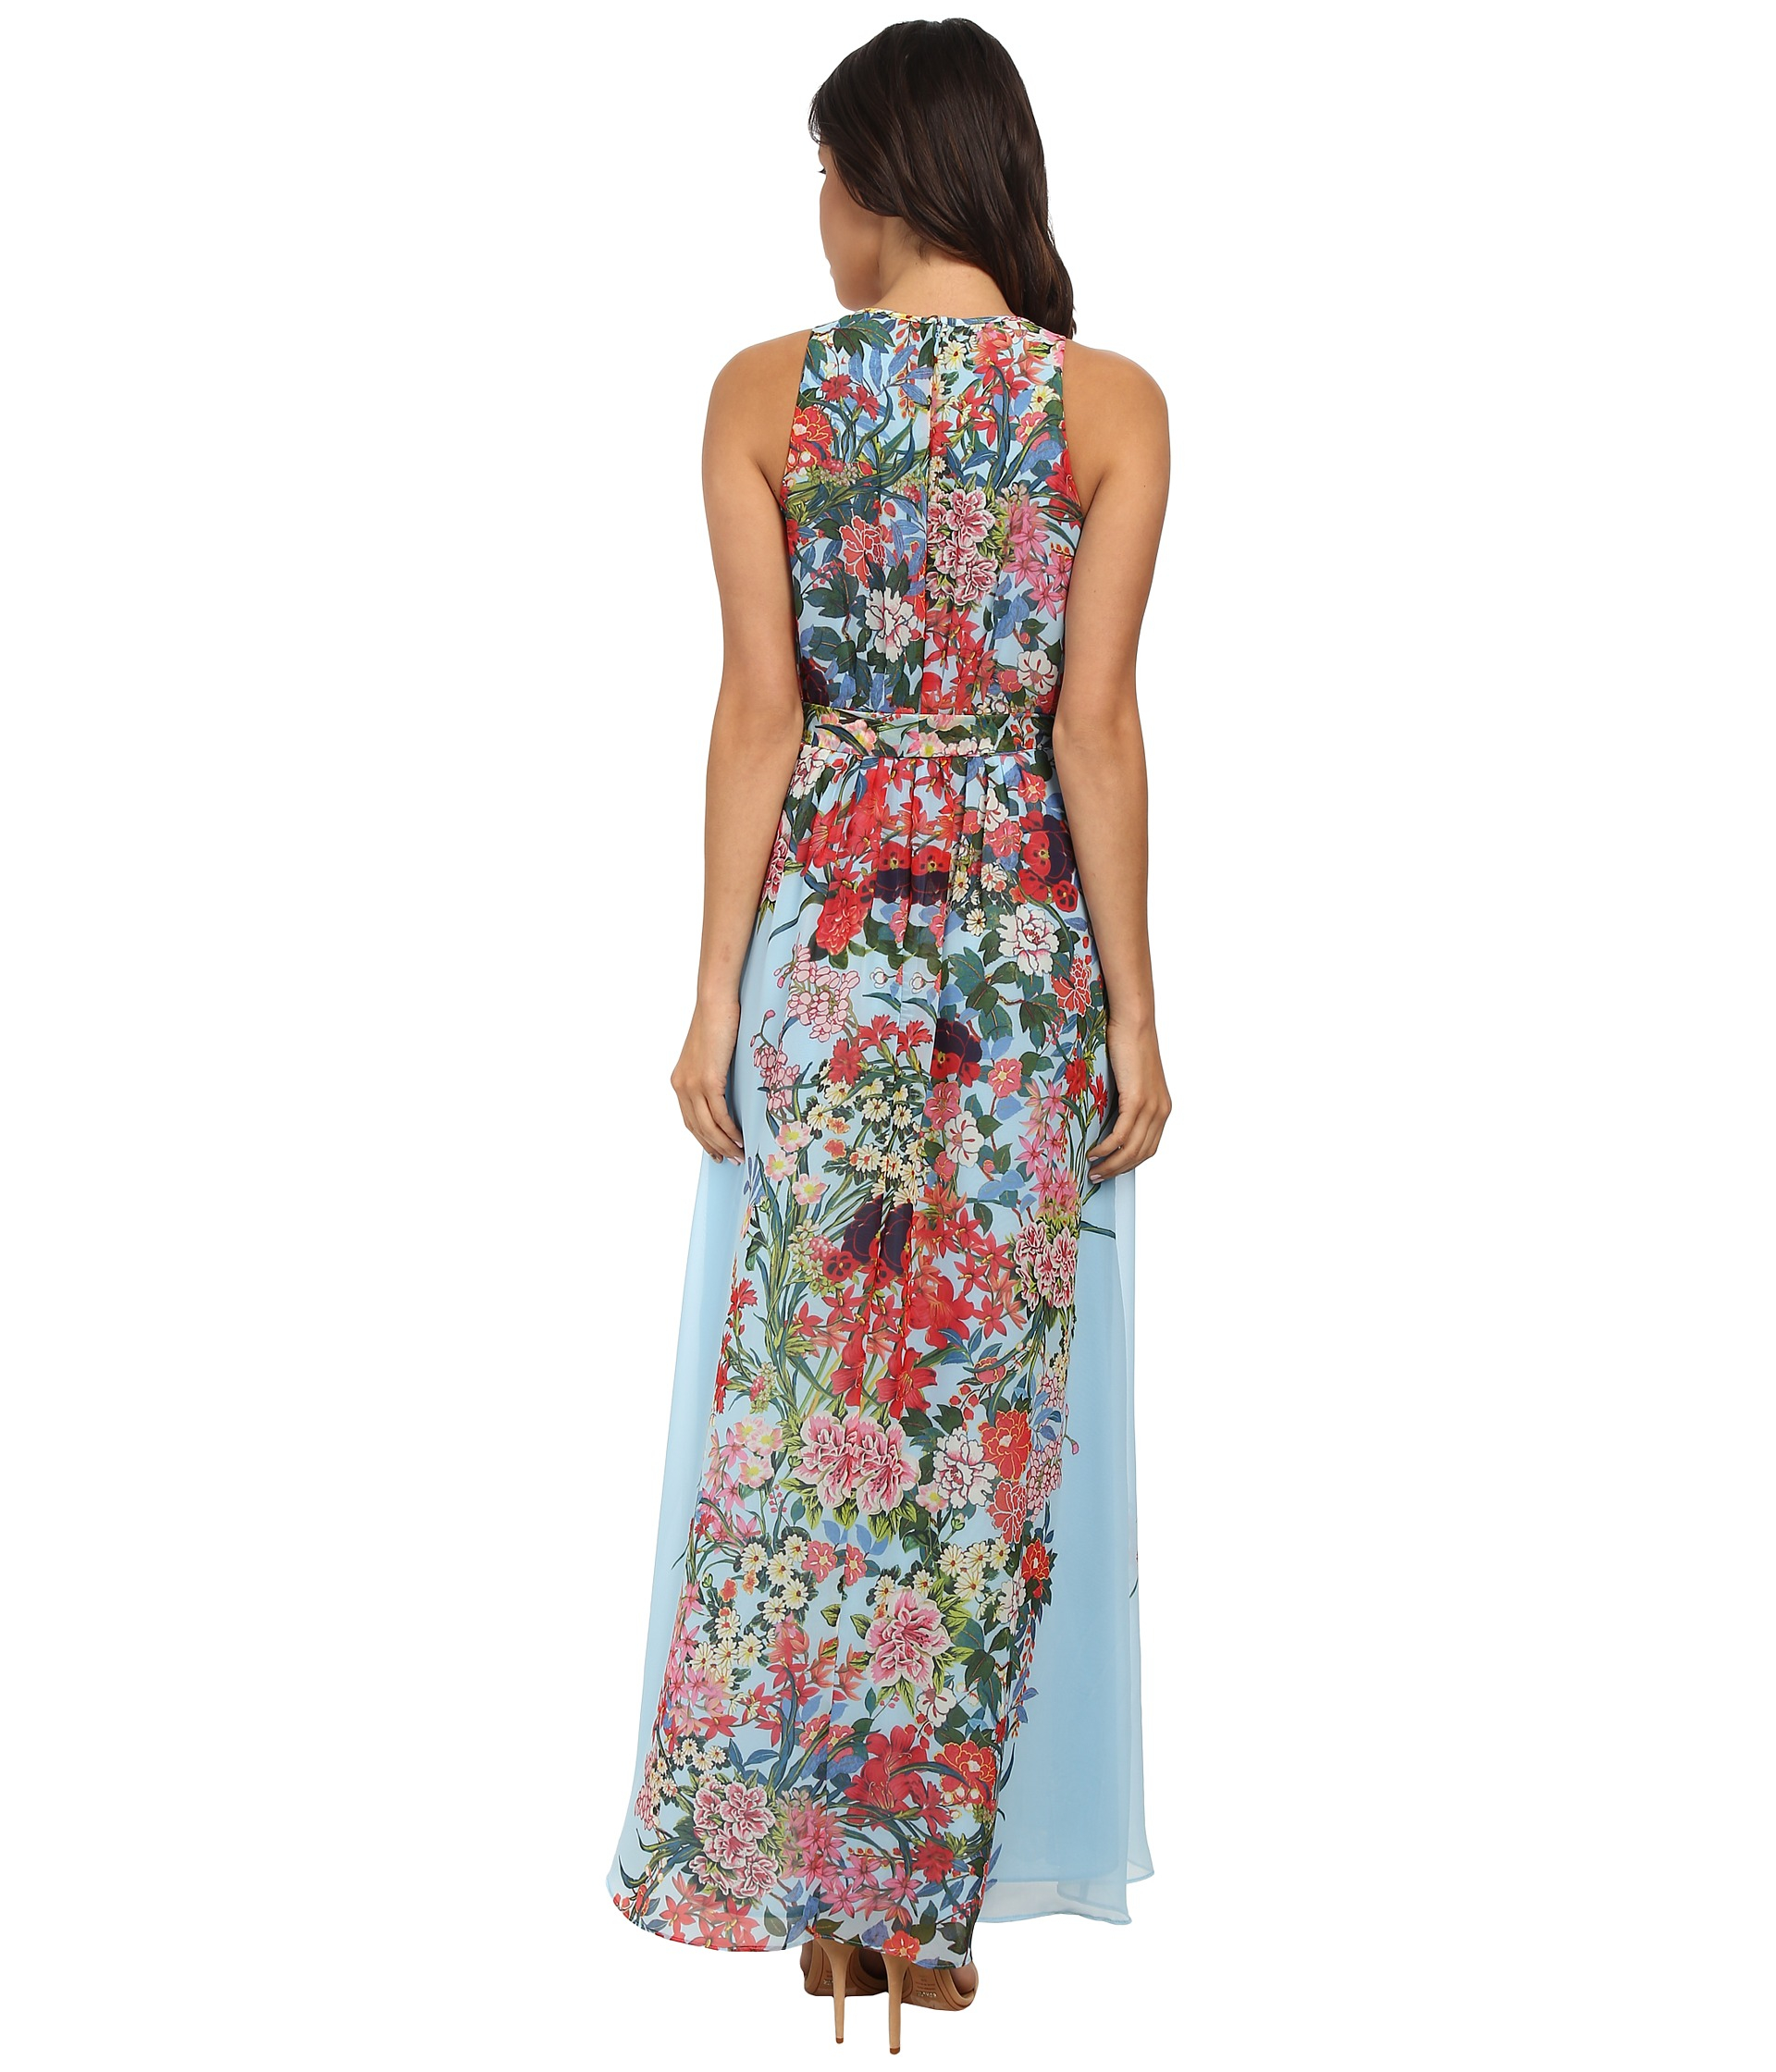 Lyst - Adrianna Papell Printed Multi Floral Halter Long Maxi Dress in Blue